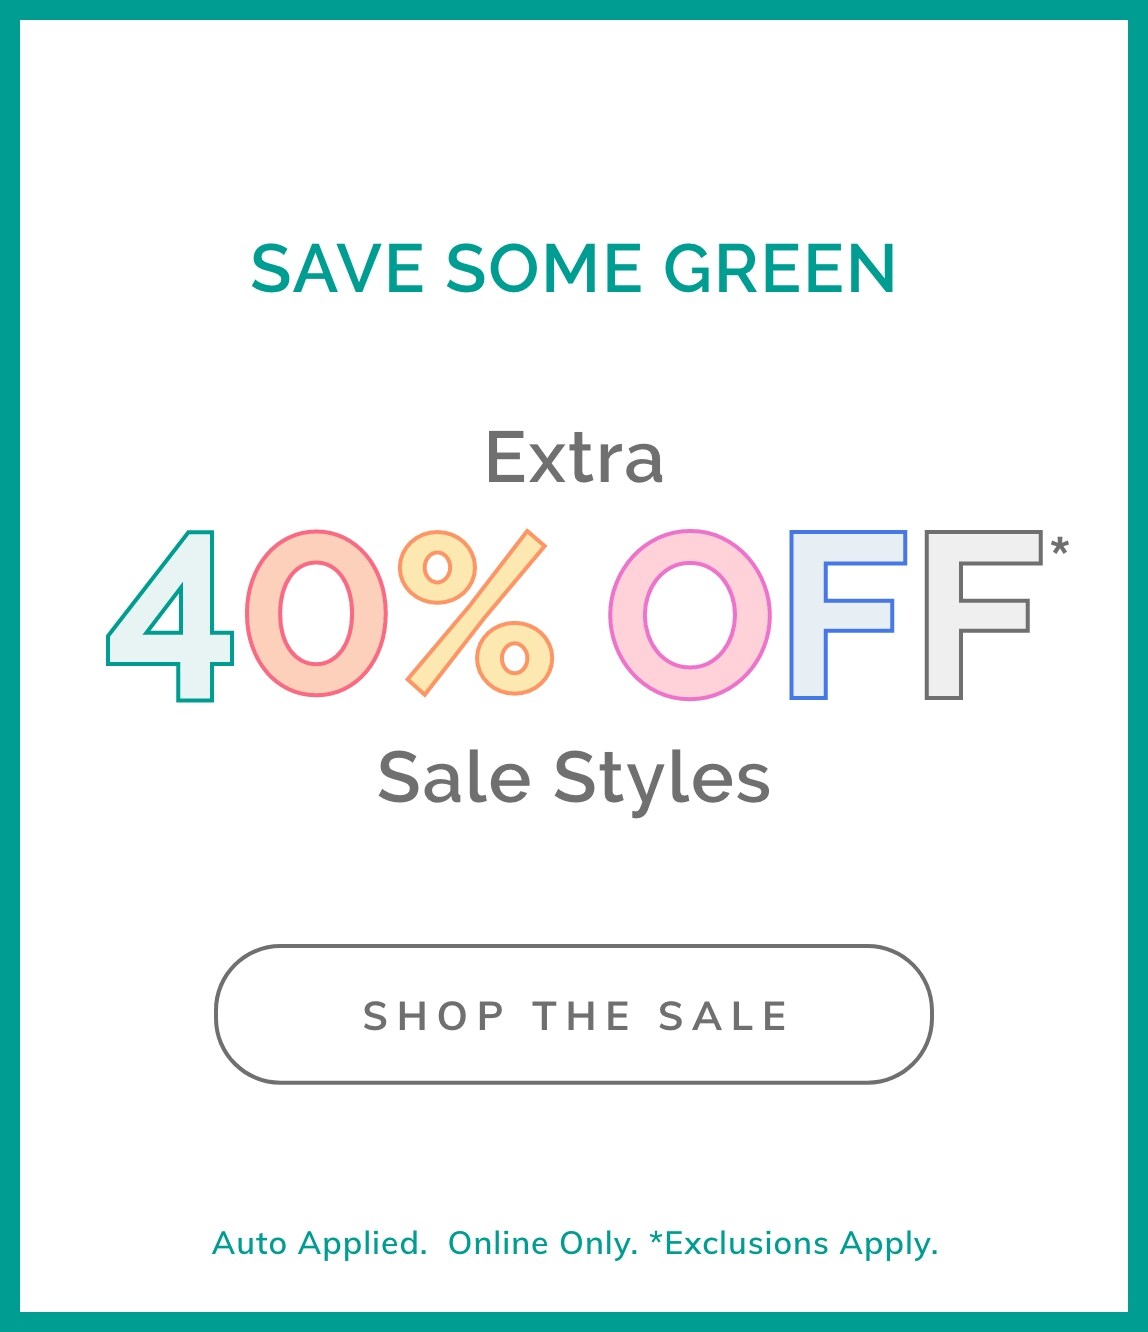 SAVE SOME GREEN EXTRA 40% OFF* SALE STYLES SHOP THE SALE Auto Applied. Online Only. *Exclusions Apply.